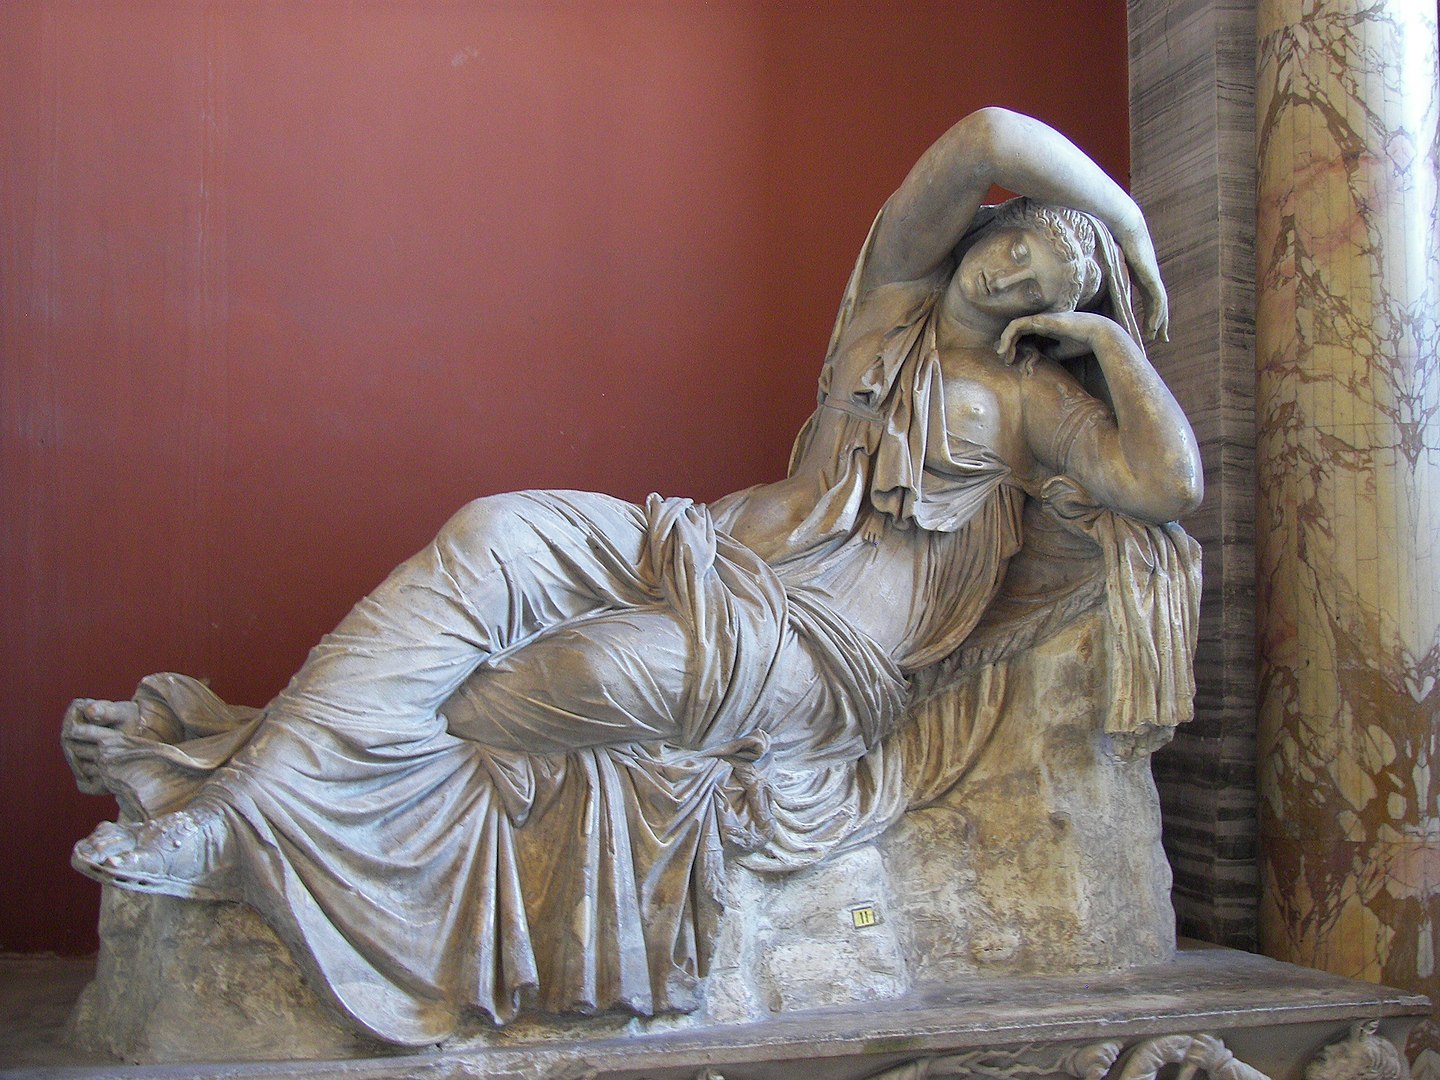 Statue of Sleeping Ariadne in the Vatican Museums, By Wknight94 - Own work, CC BY-SA 3.0